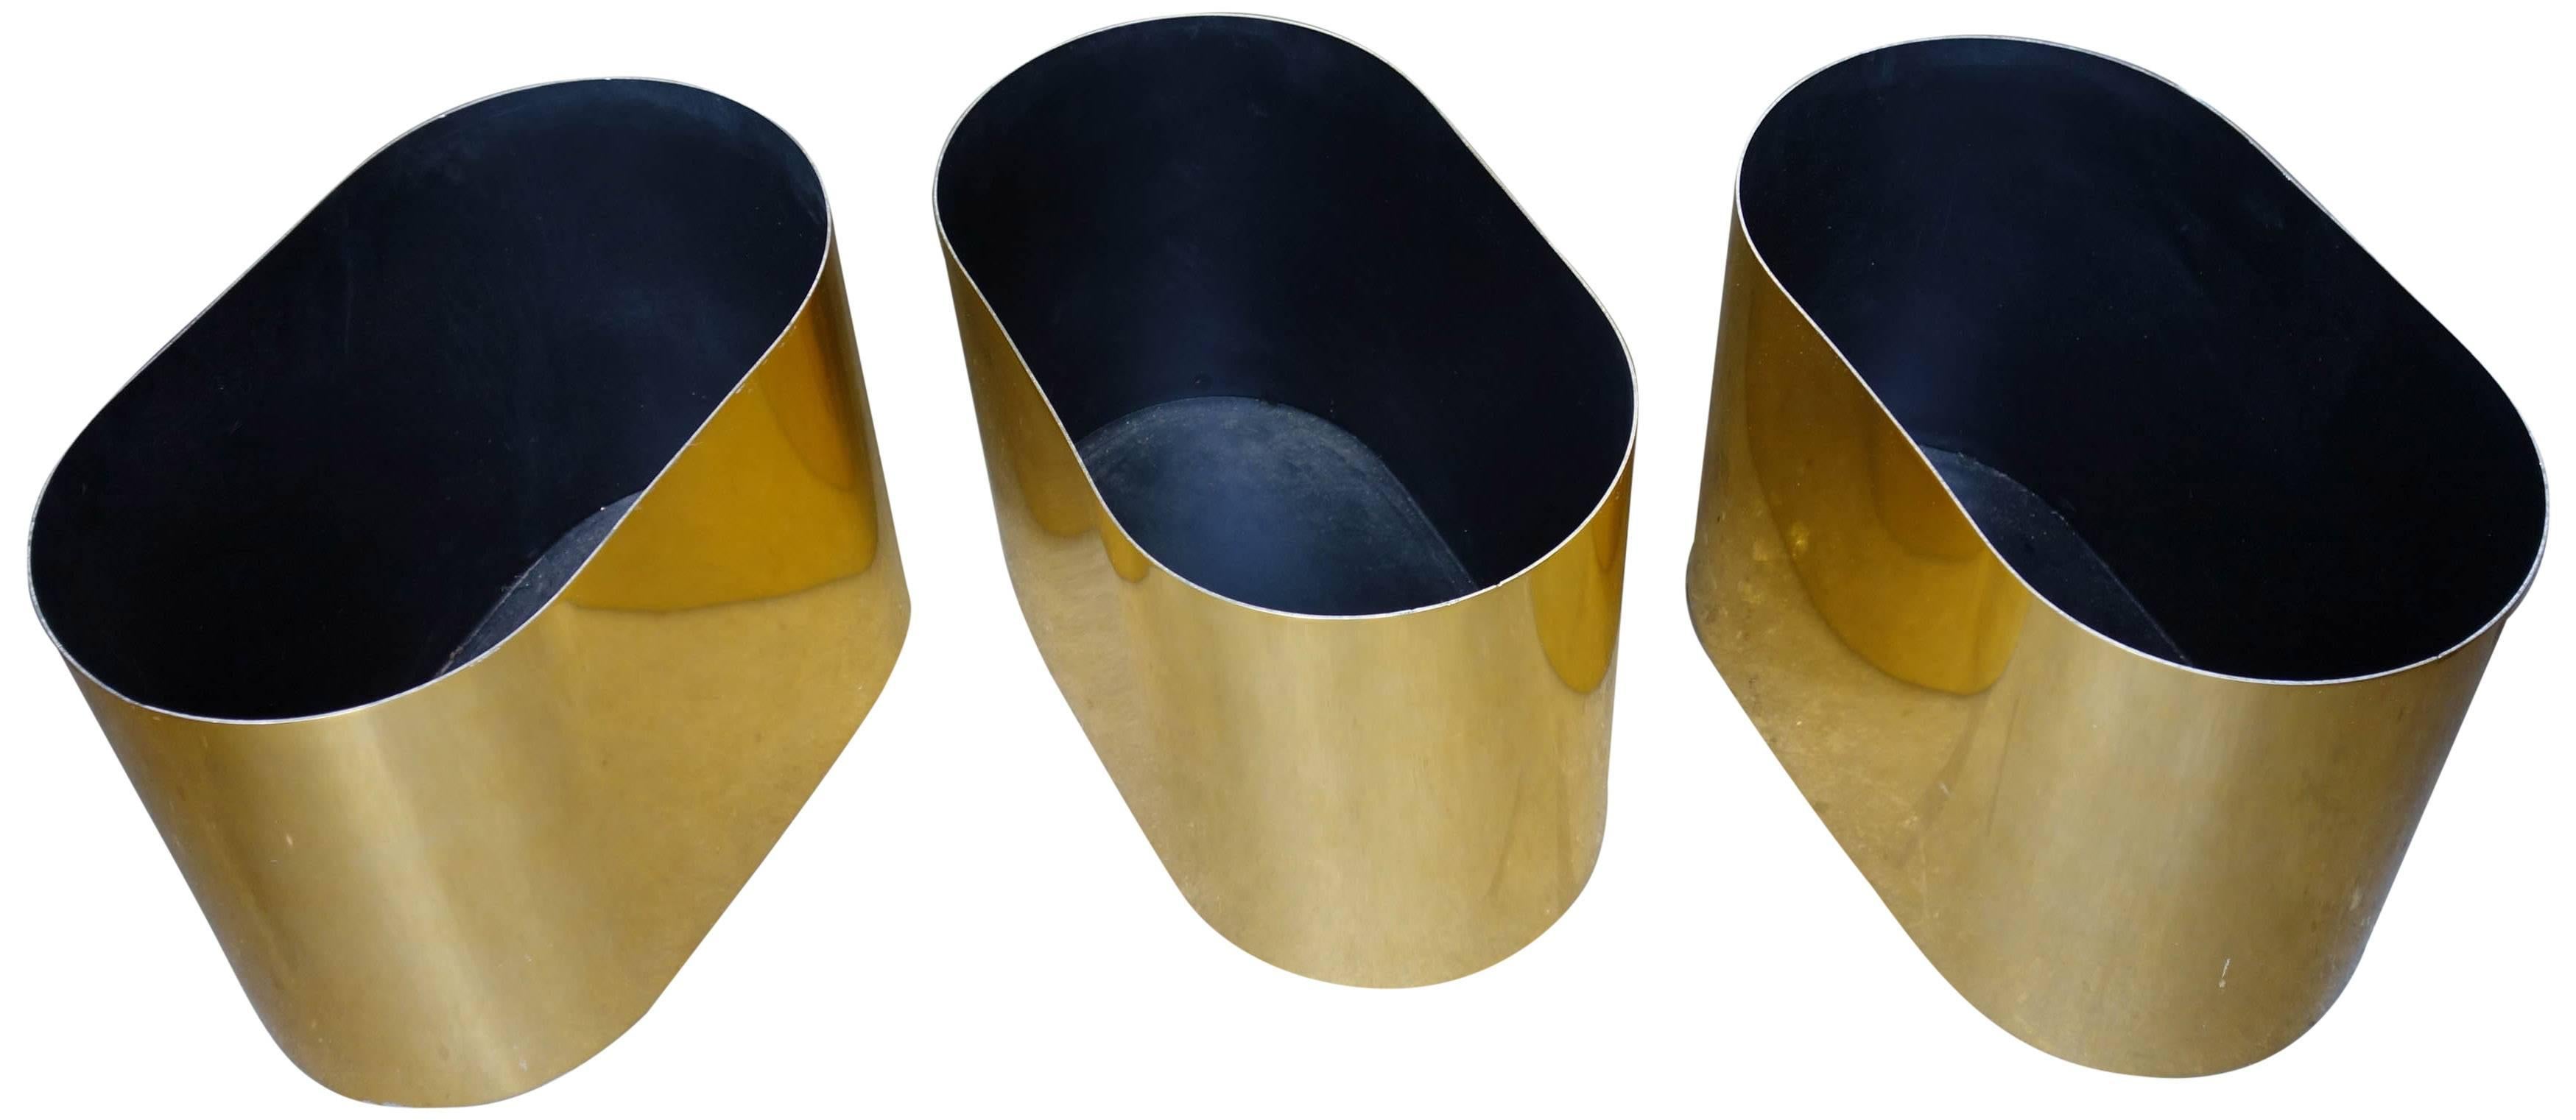 Very exciting set of three brass planters designed by Paul Mayen for Habitat Architectural Supplements. These are unused 